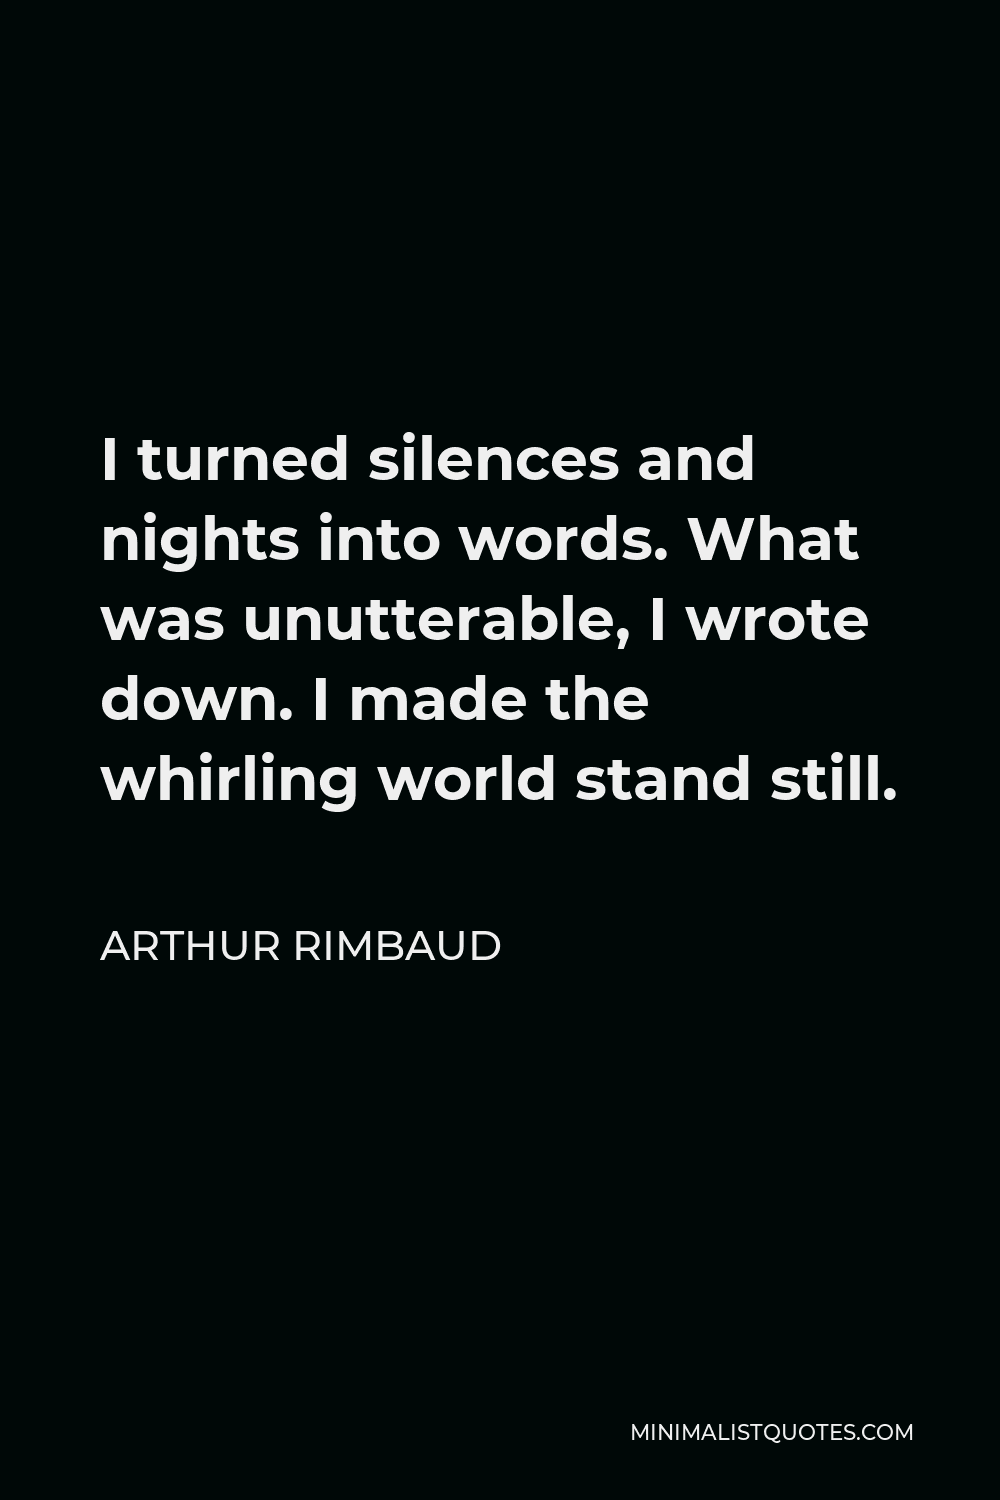 Arthur Rimbaud Quote - I turned silences and nights into words. What was unutterable, I wrote down. I made the whirling world stand still.